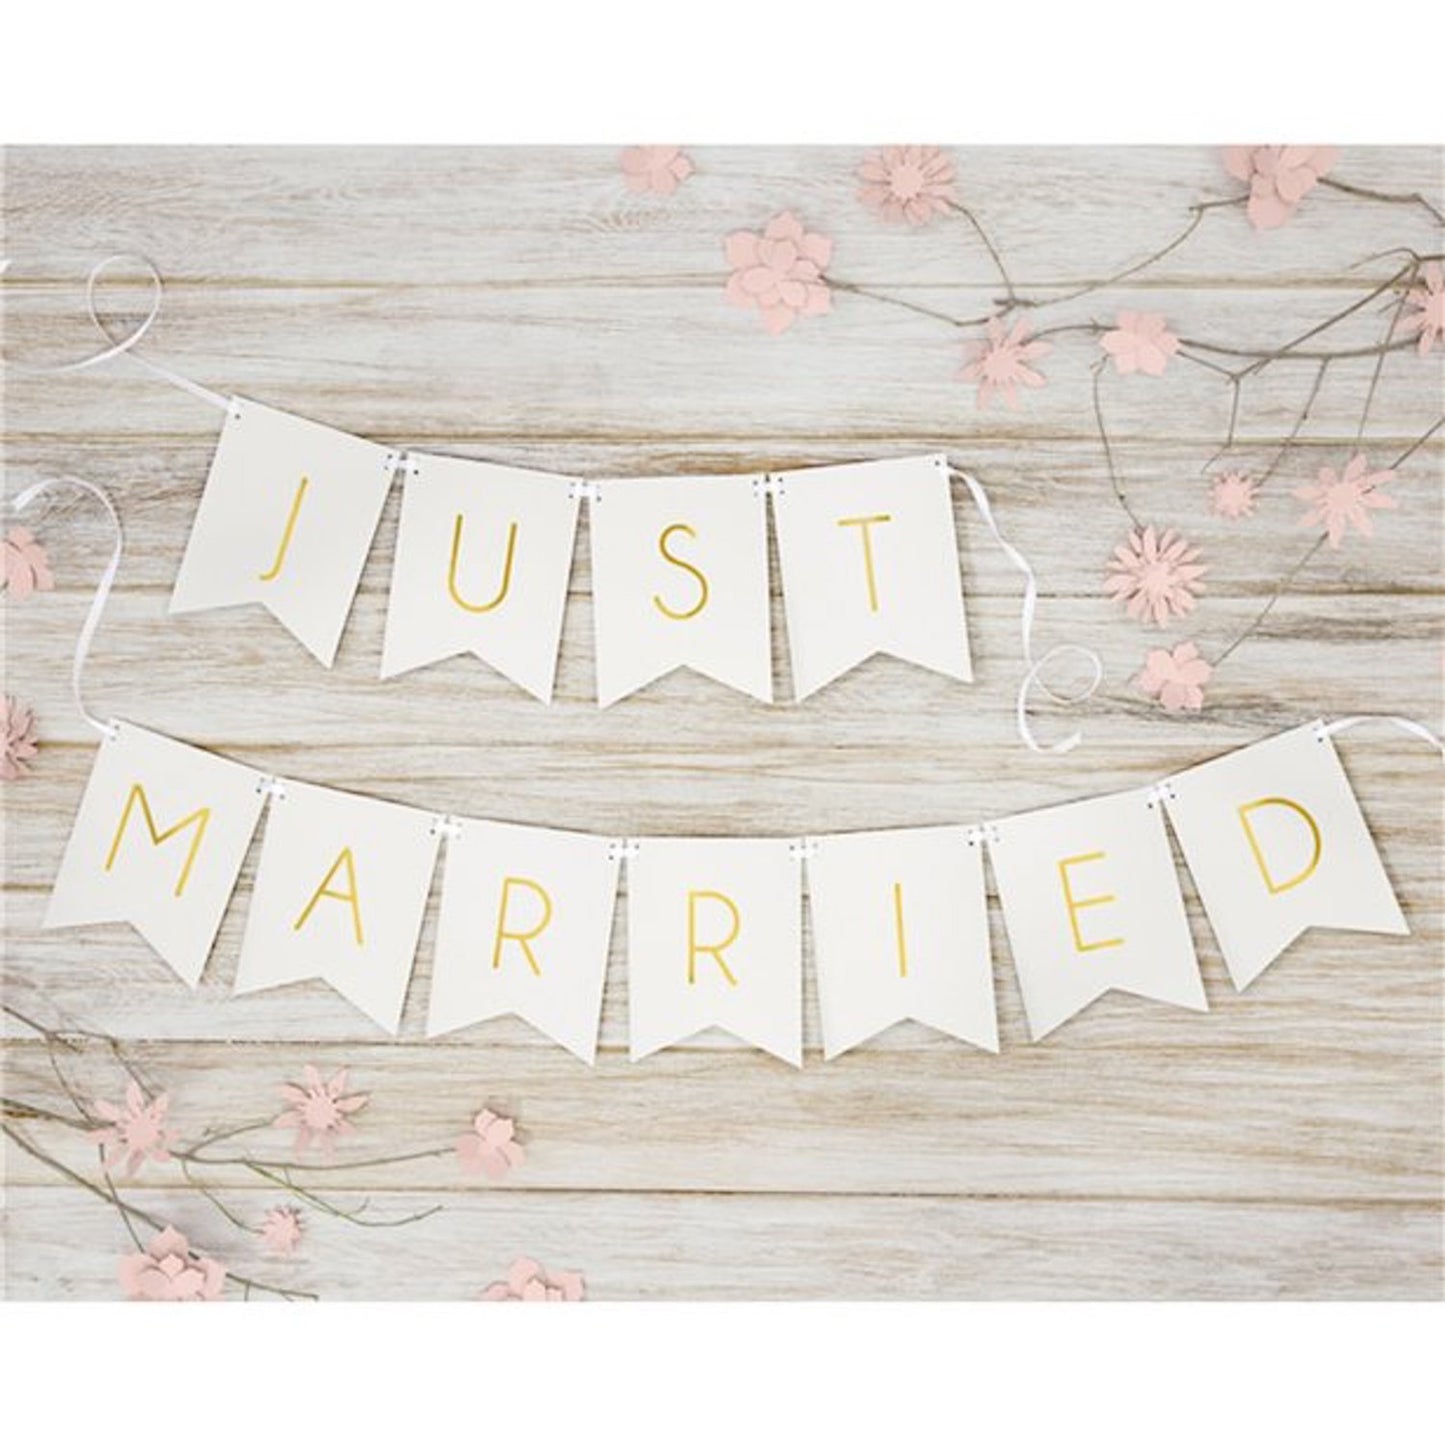 Just Married White and Gold Wedding Banner